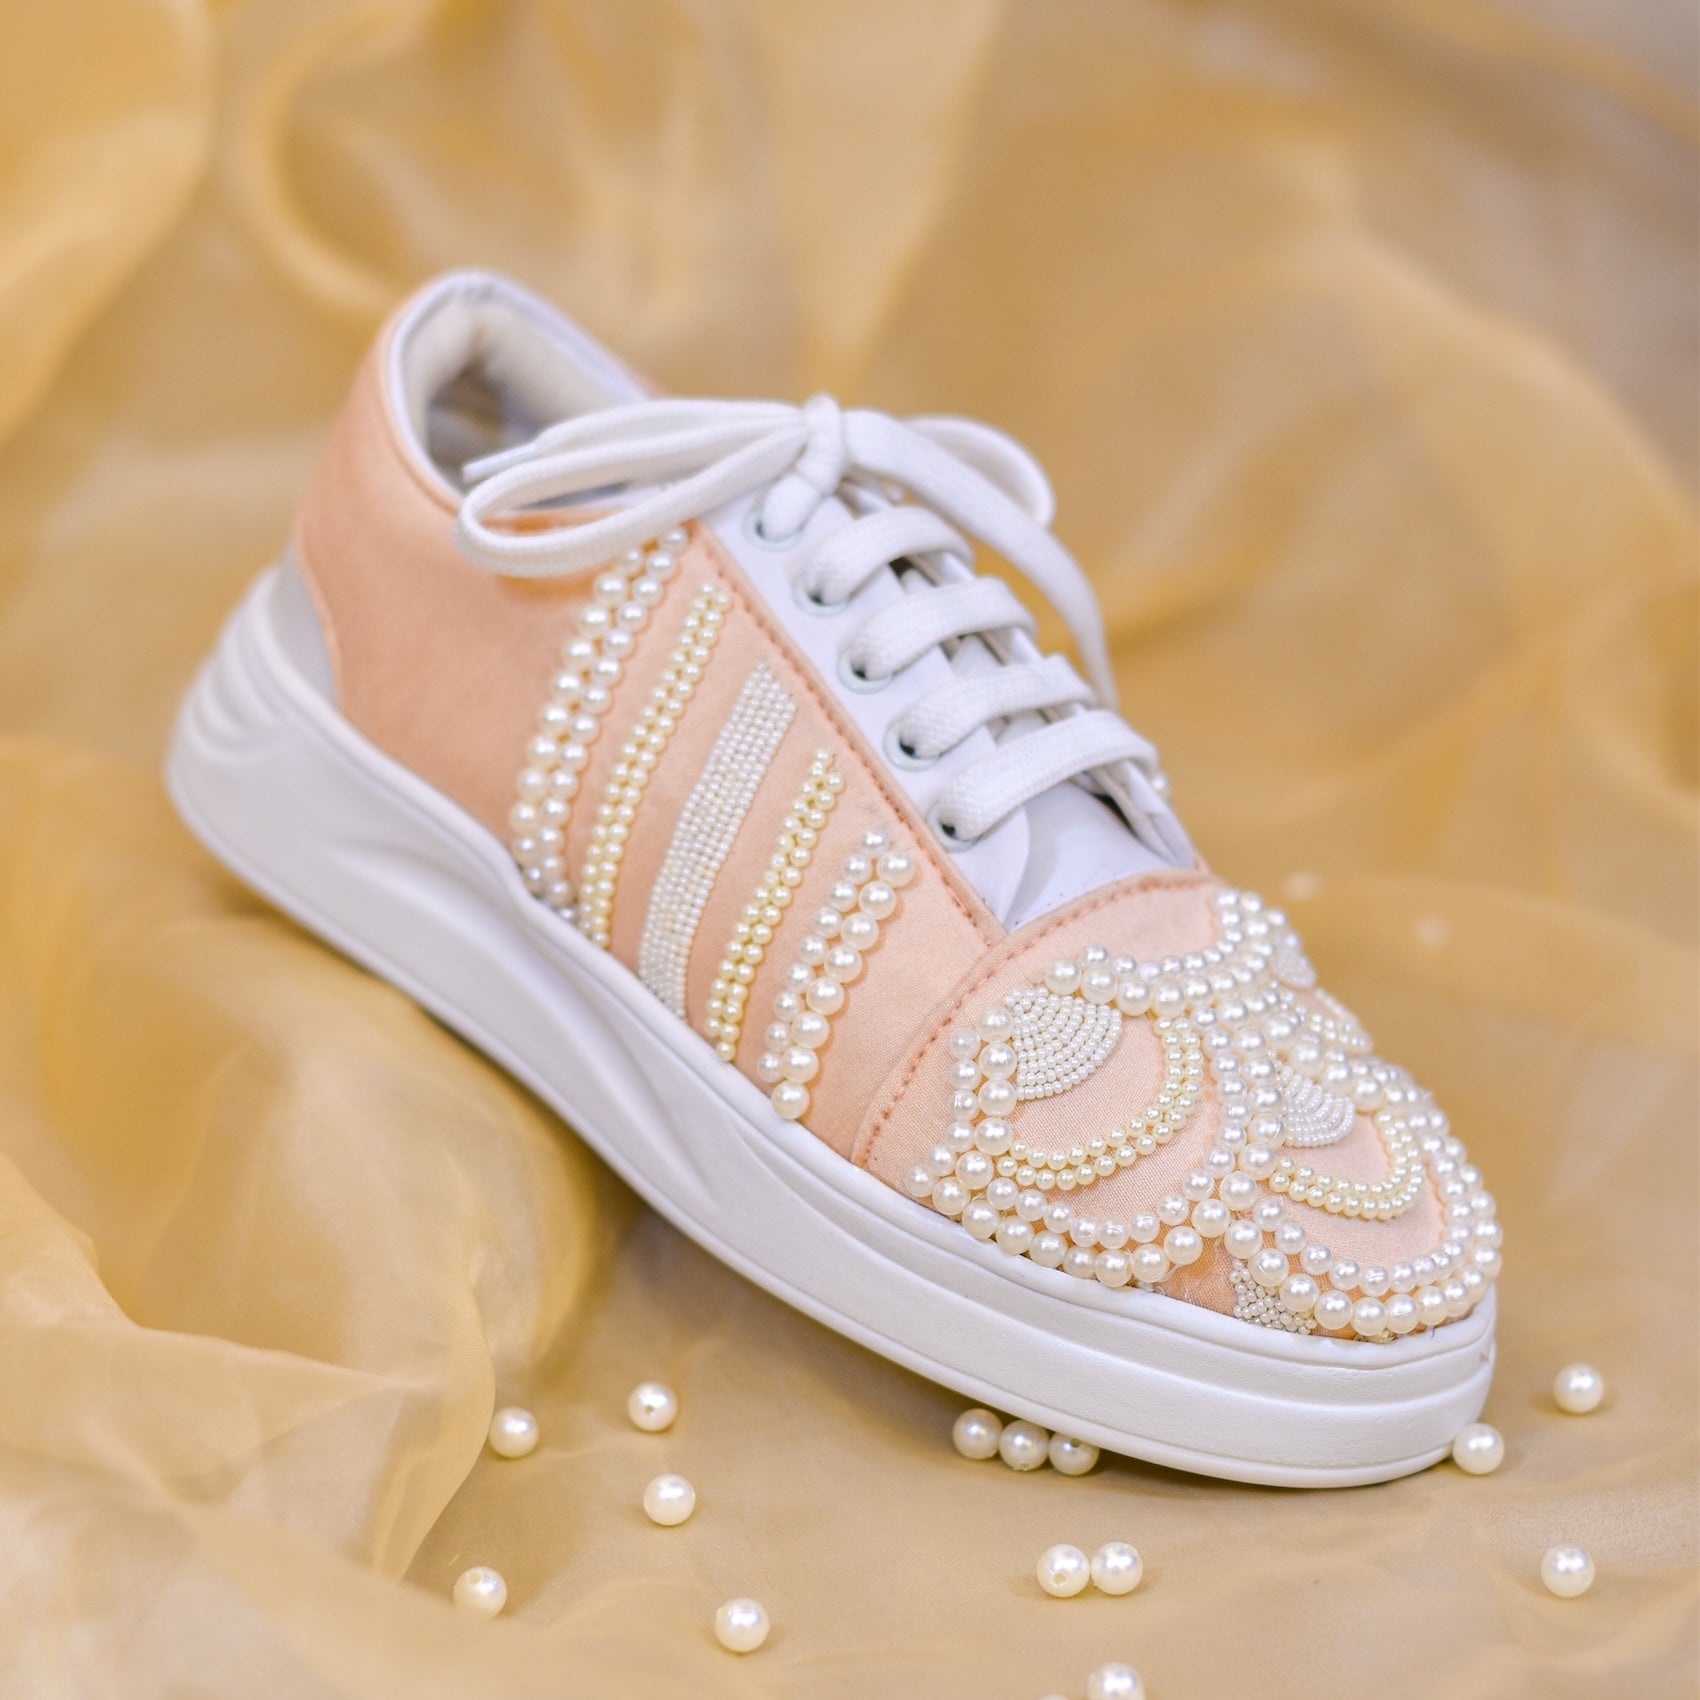 Pearl embroidery shoes for weddings and functions